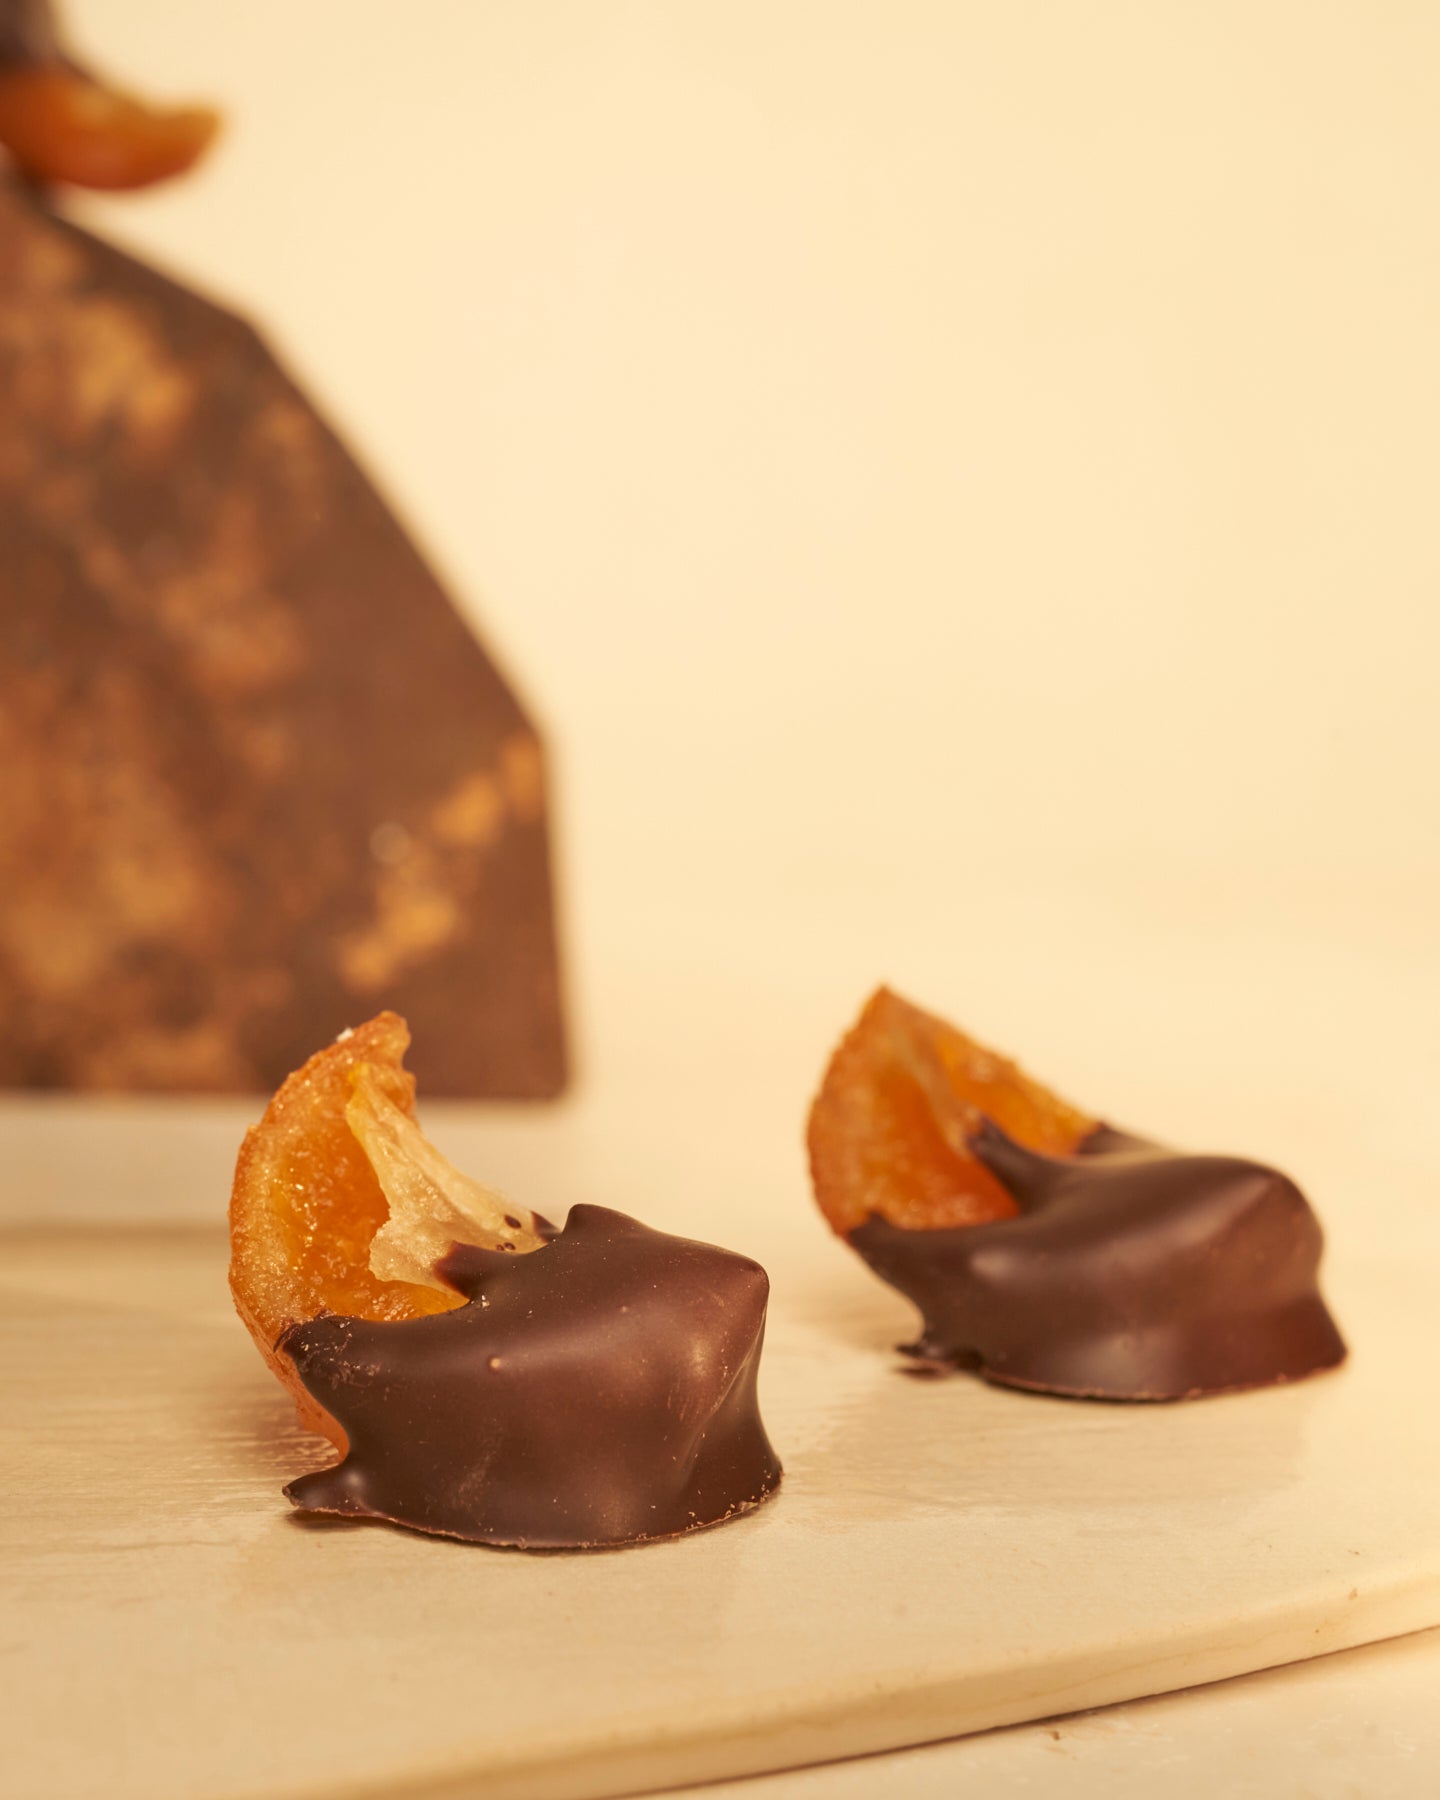 Candied Clementines Covered in Dark Chocolate